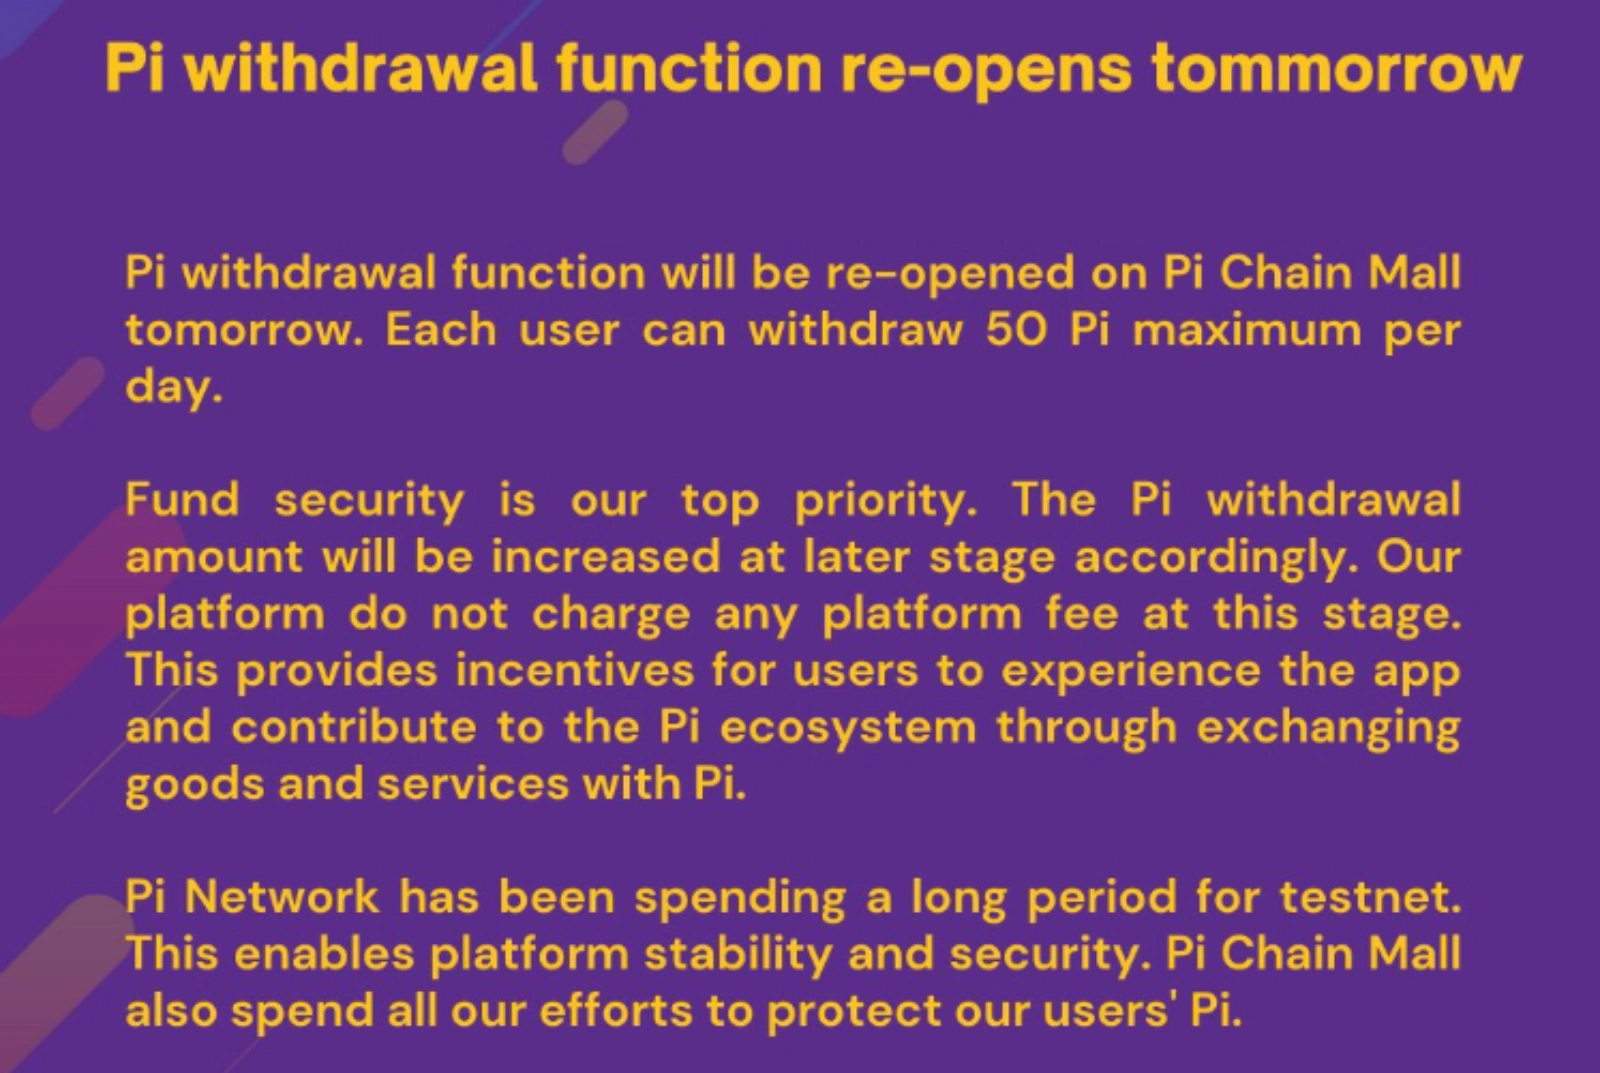 Pi Chain Mall reopened withdrawals on its platform